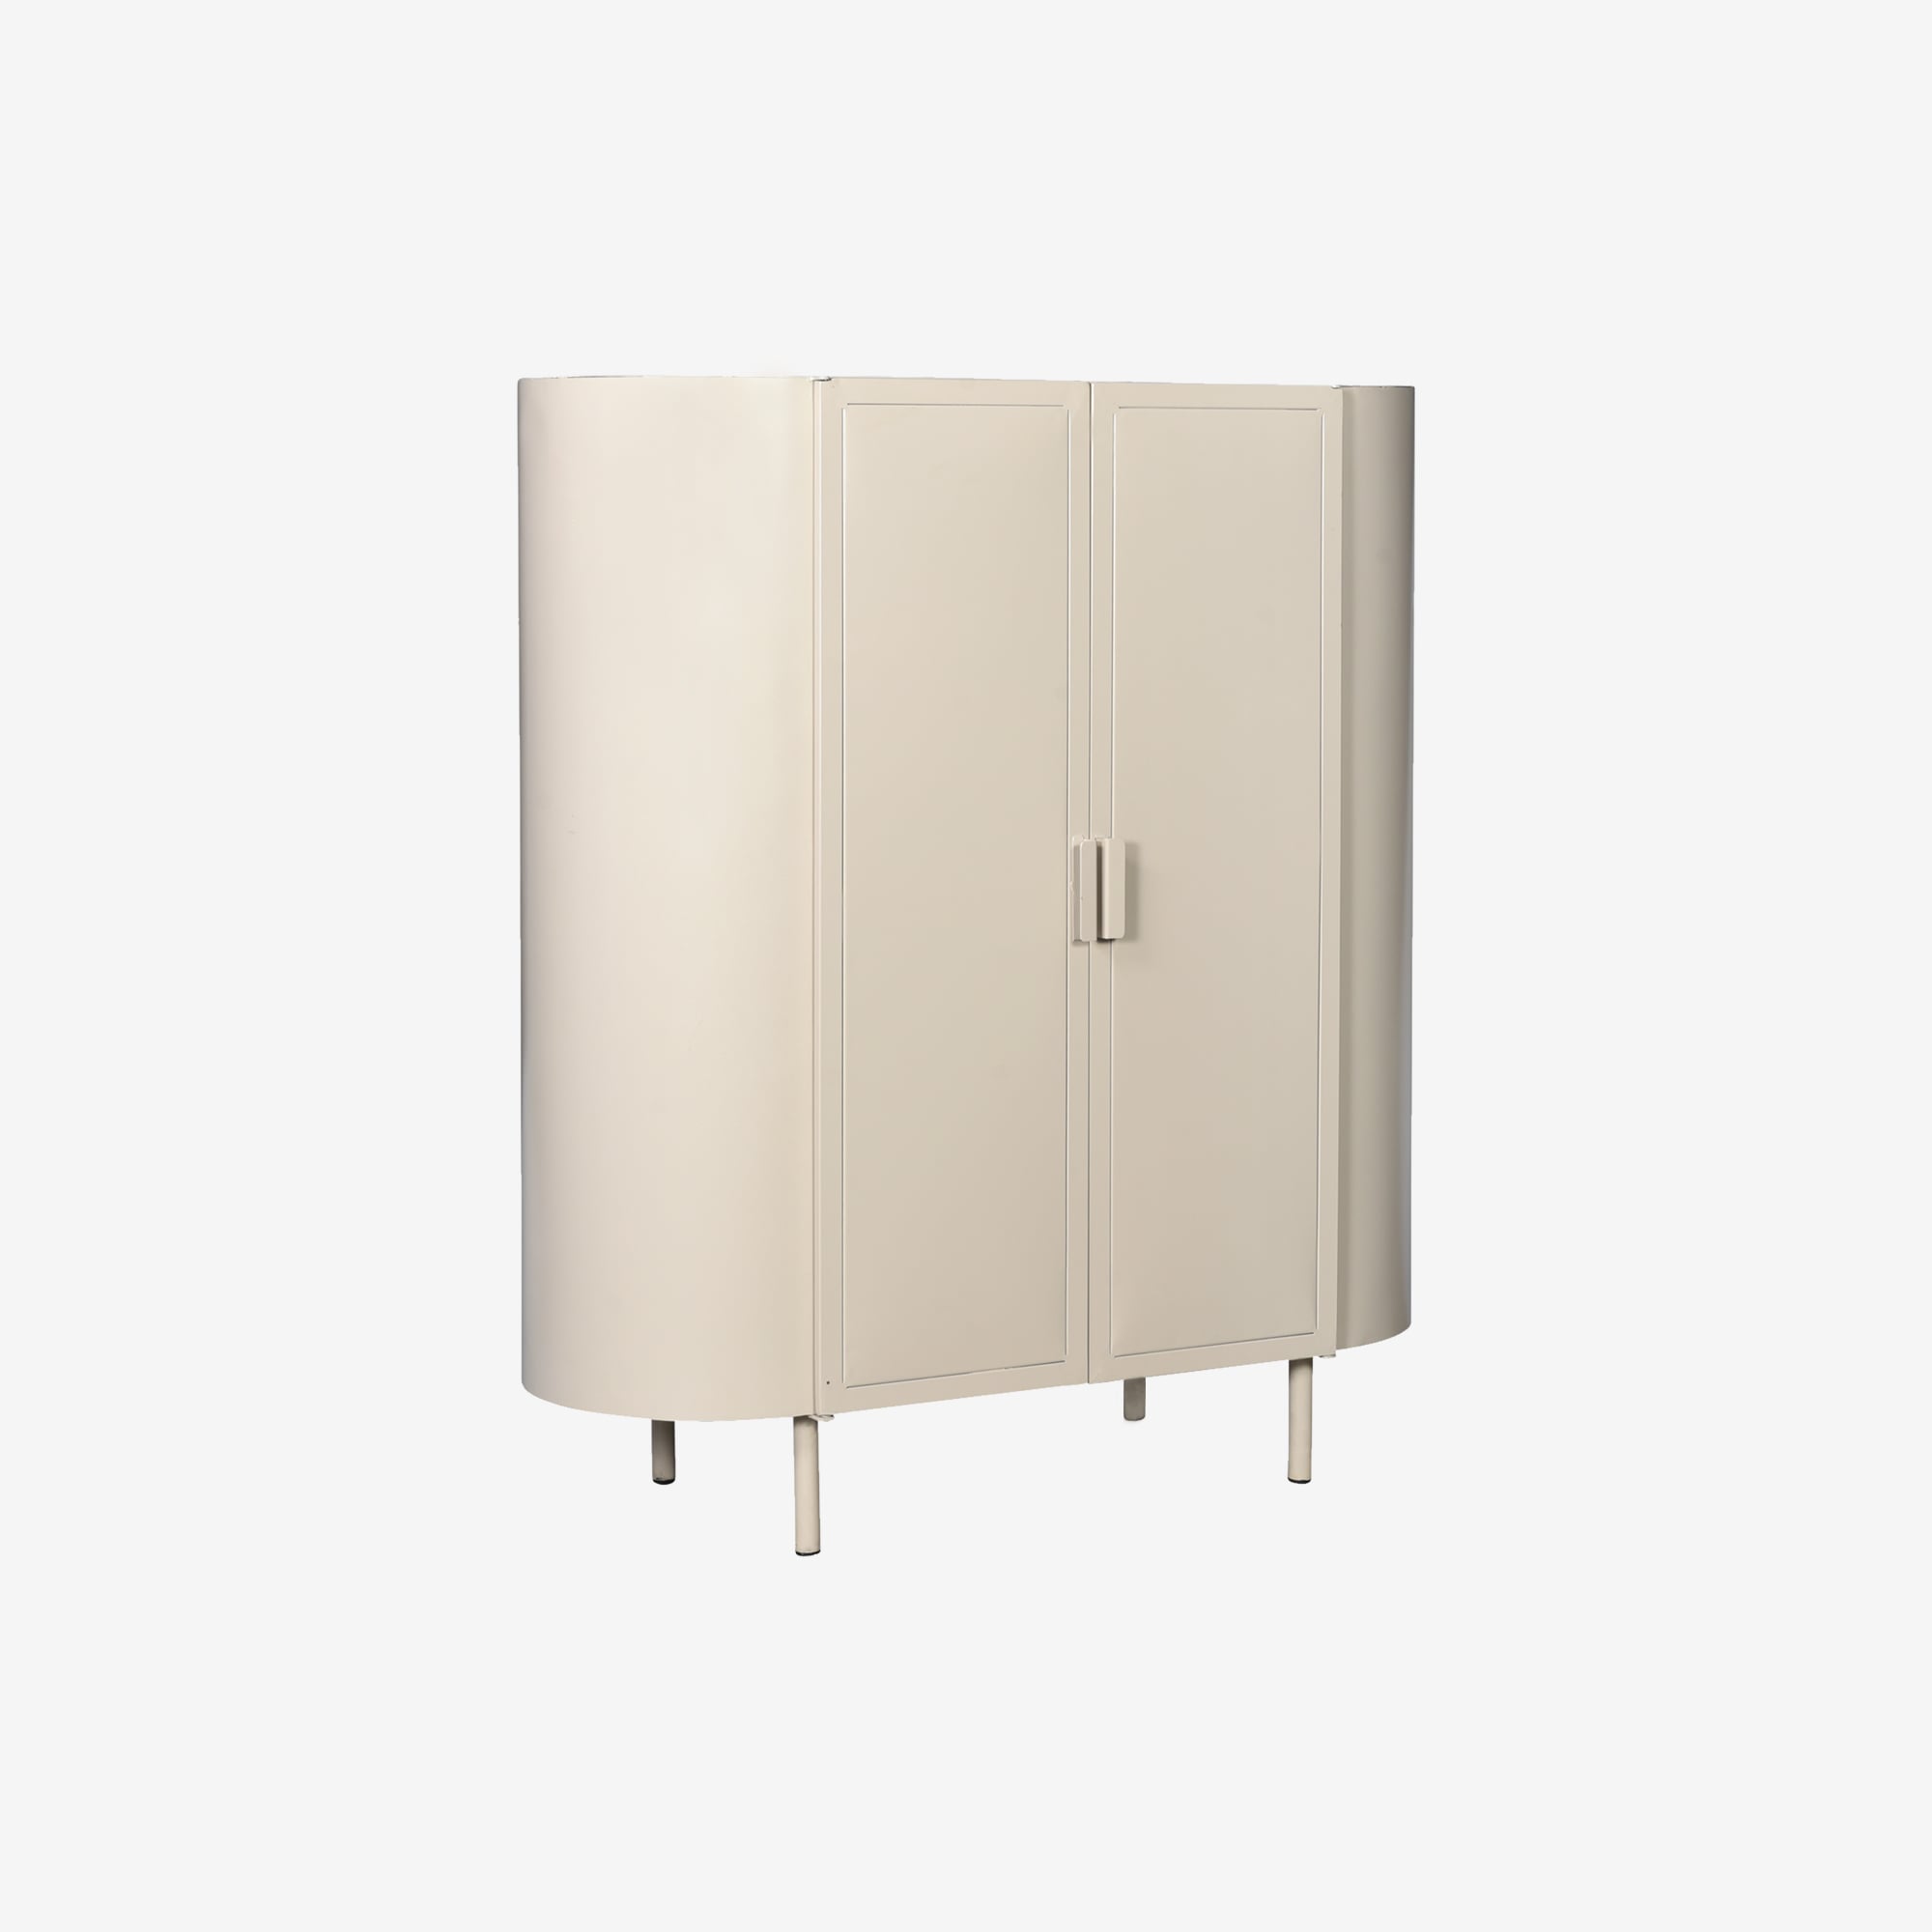 Montreal wall cabinet – sand